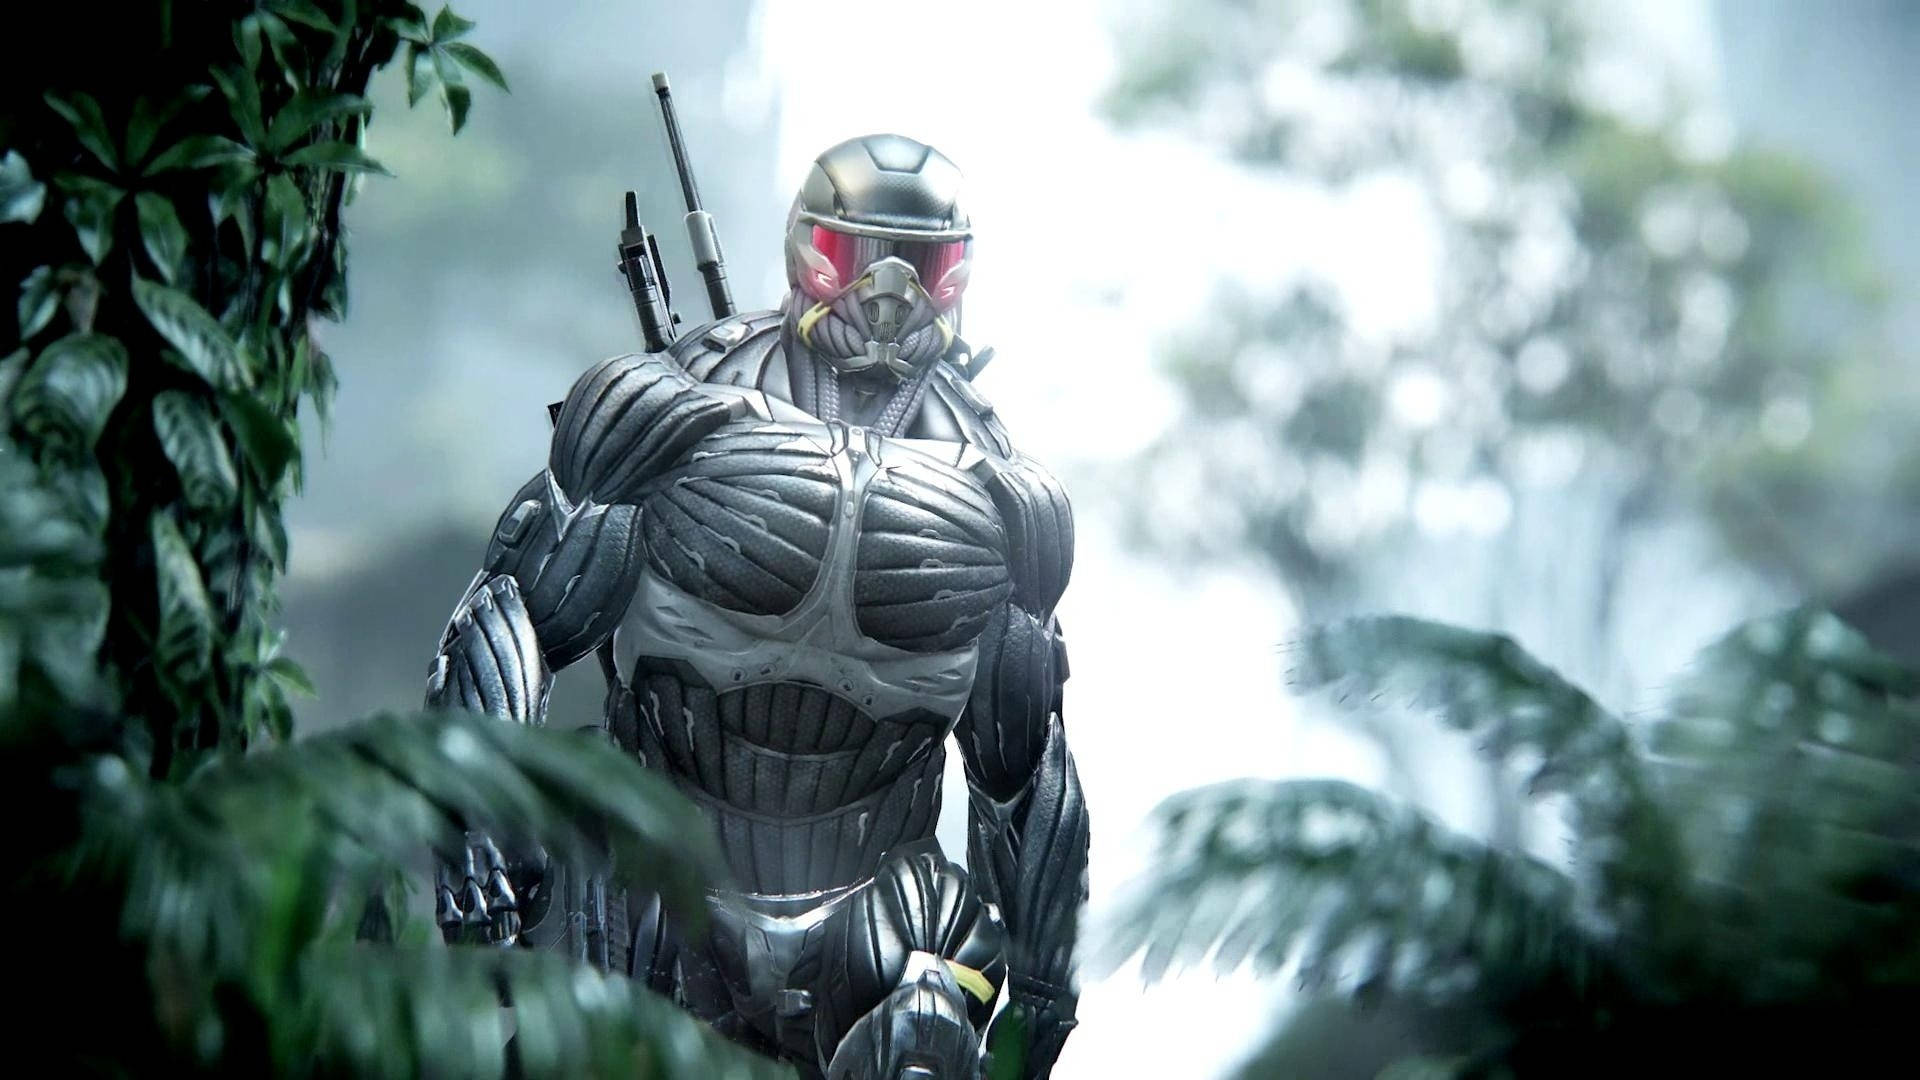 Top 999+ Crysis 3 Wallpapers Full HD, 4K✅Free to Use